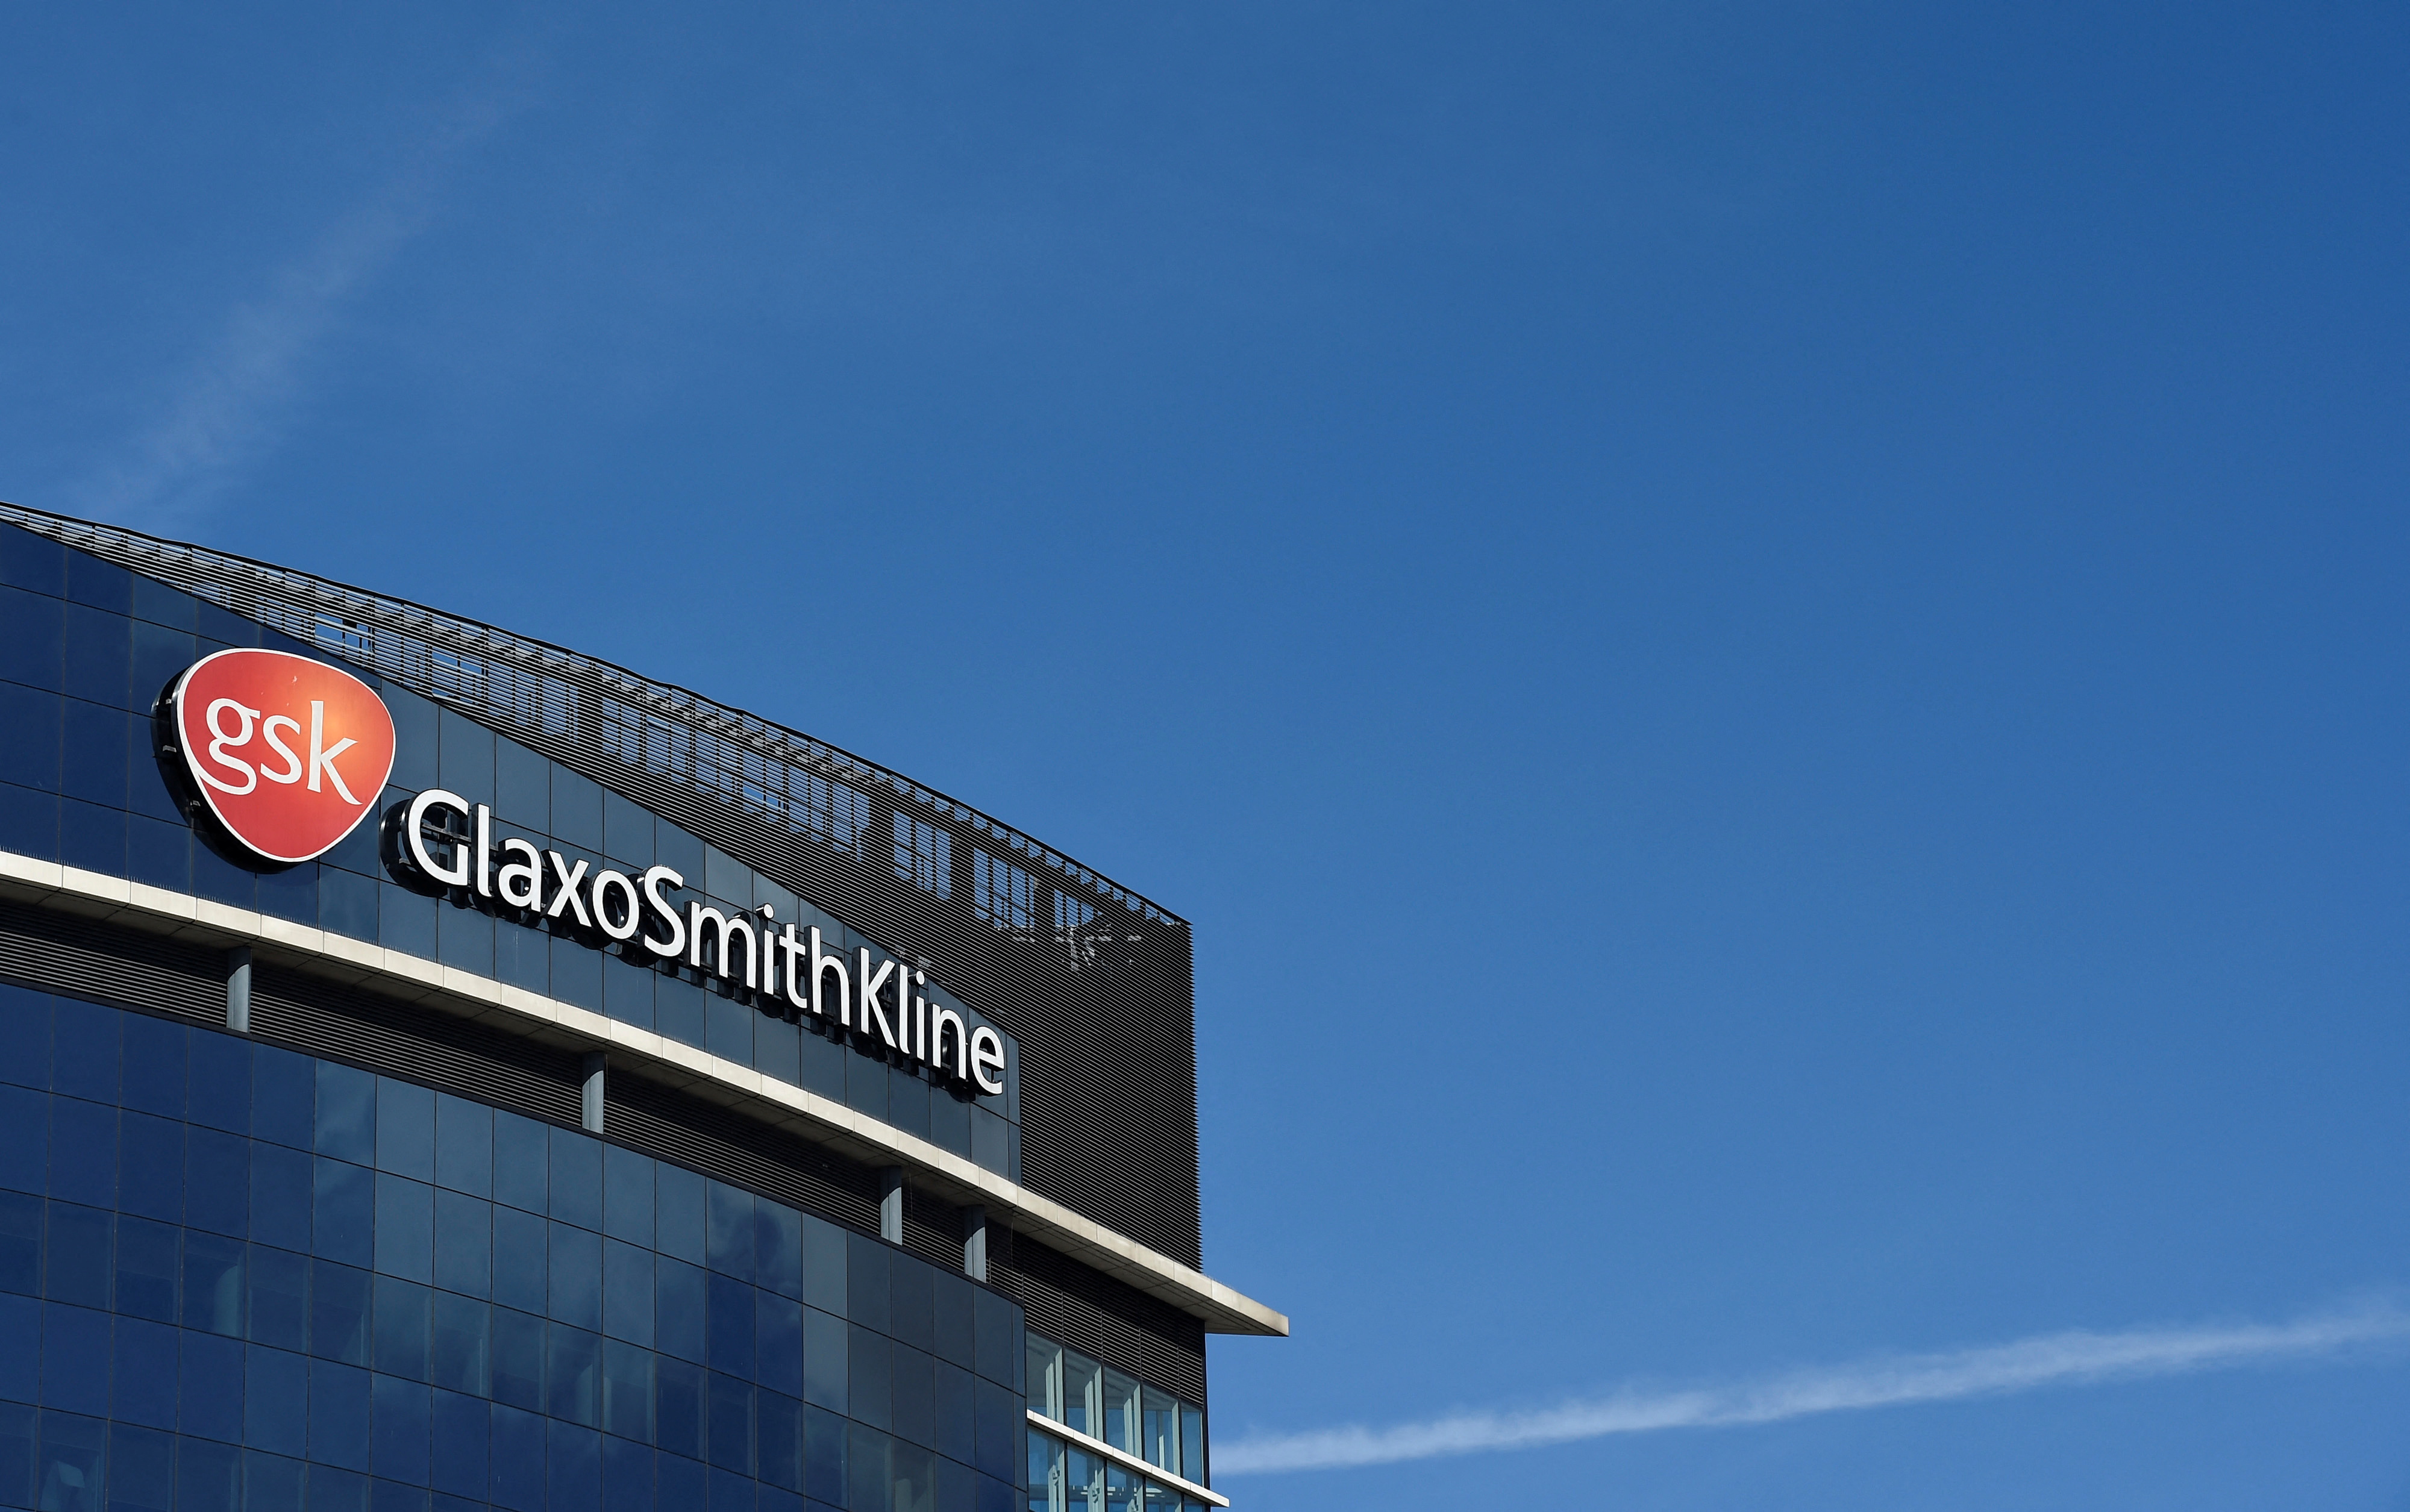 Signage for GlaxoSmithKline is seen on it's offices in London, Britain